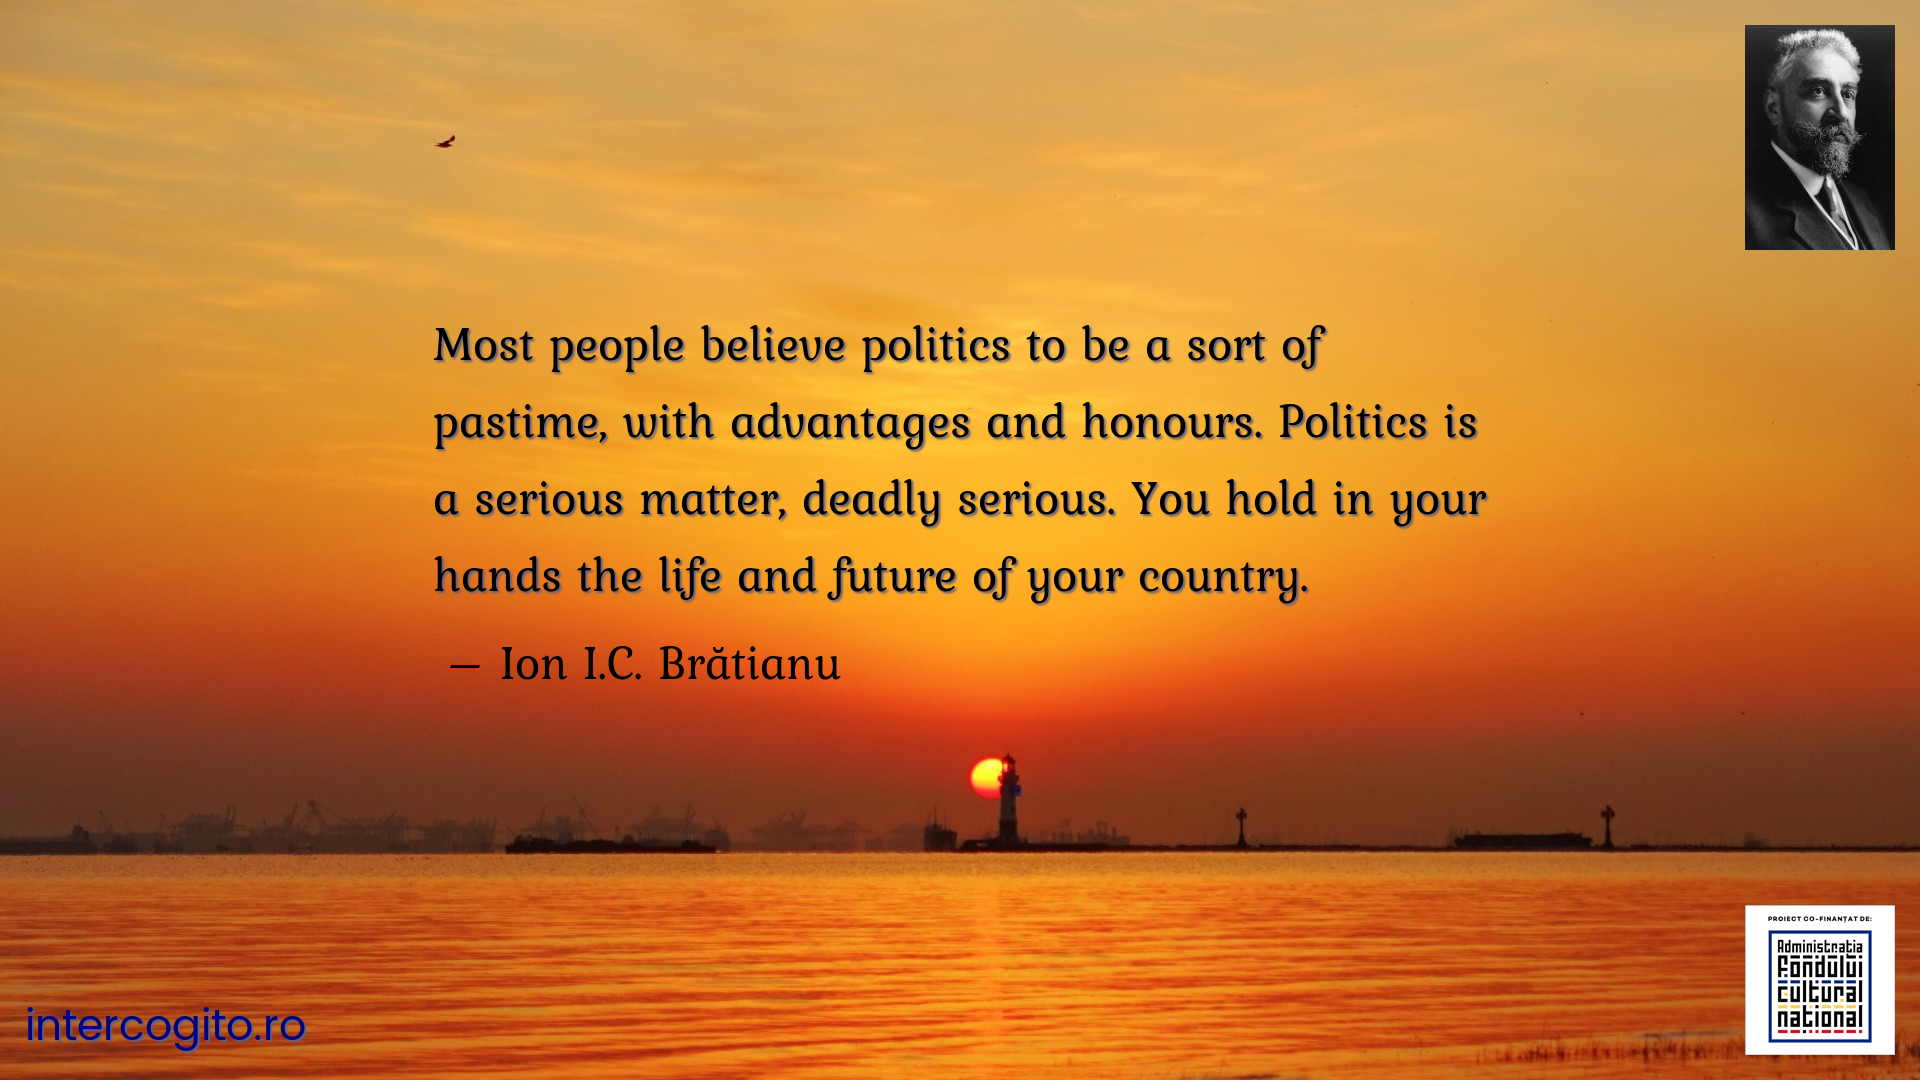 Most people believe politics to be a sort of pastime, with advantages and honours. Politics is a serious matter, deadly serious. You hold in your hands the life and future of your country.